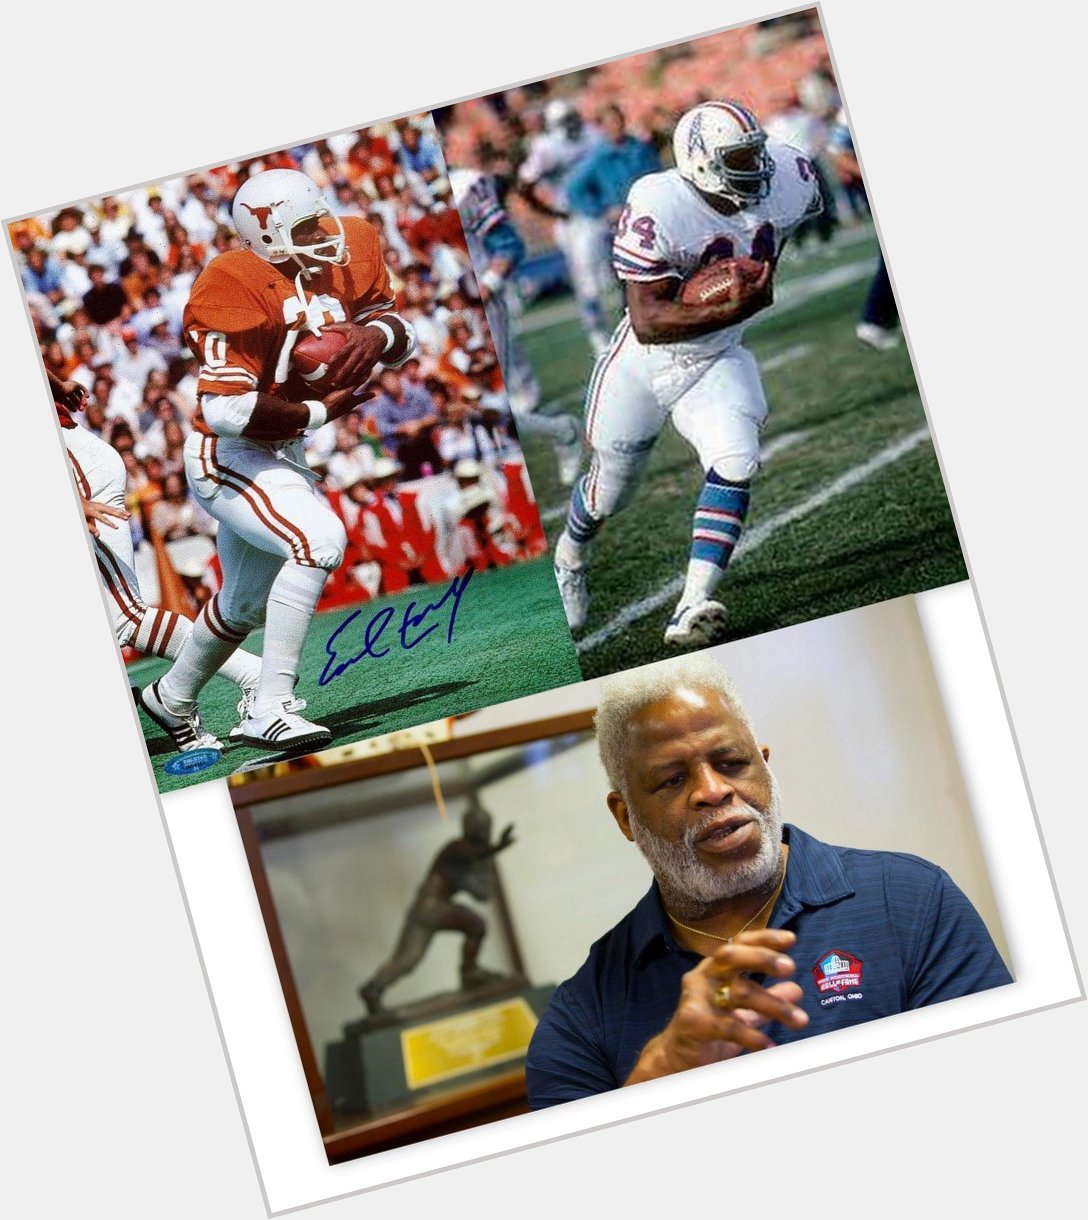 Earl Campbell - March 29, 1955
HAPPY BIRTHDAY 